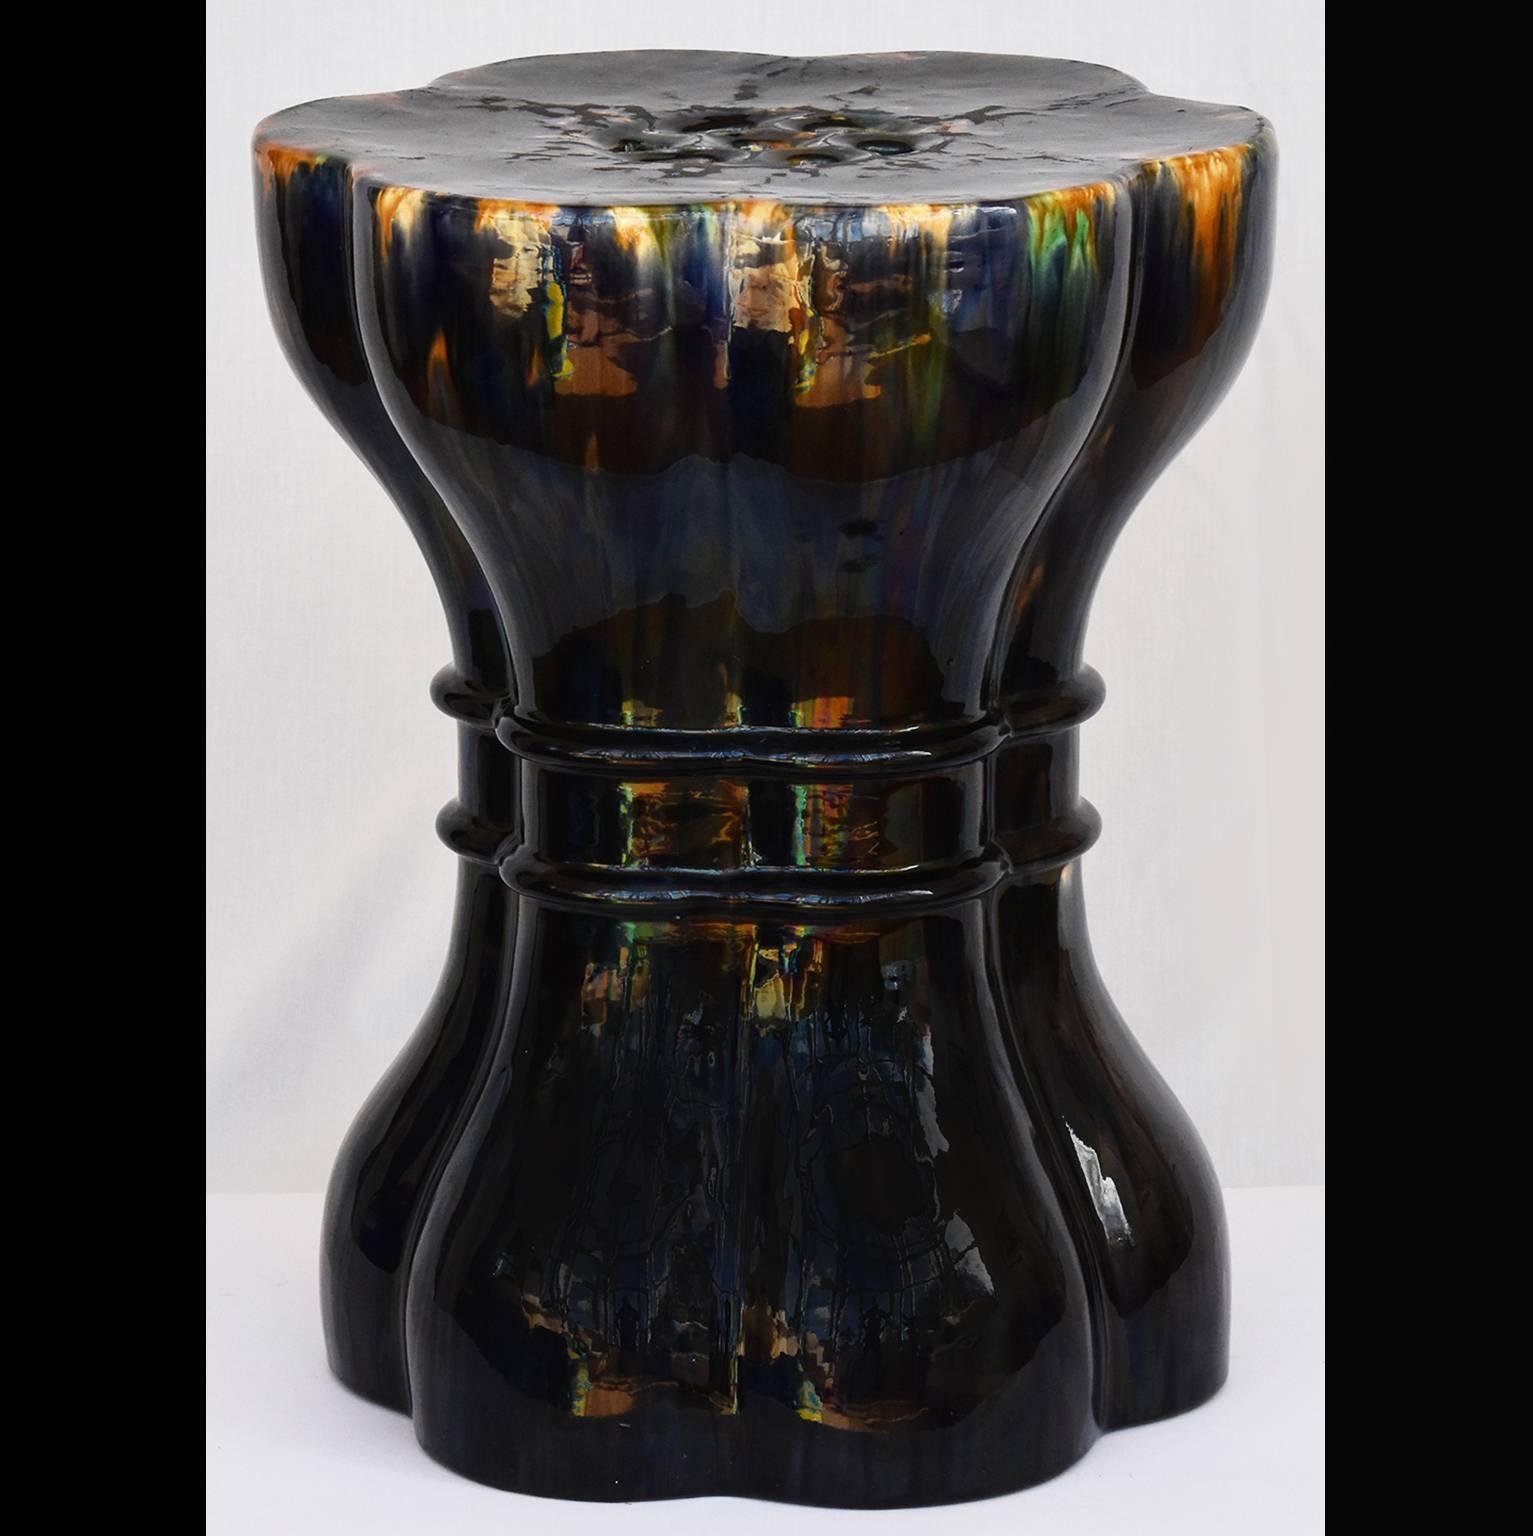 A very rare Minton Majolica garden stool designed by A.W.N Pugin, circa 1860.
The body decorated in a mottle cobalt blue green and shades of browns in the style of Bernard Palissy.
This is the only known example of the Minton 'Pugin' garden stool